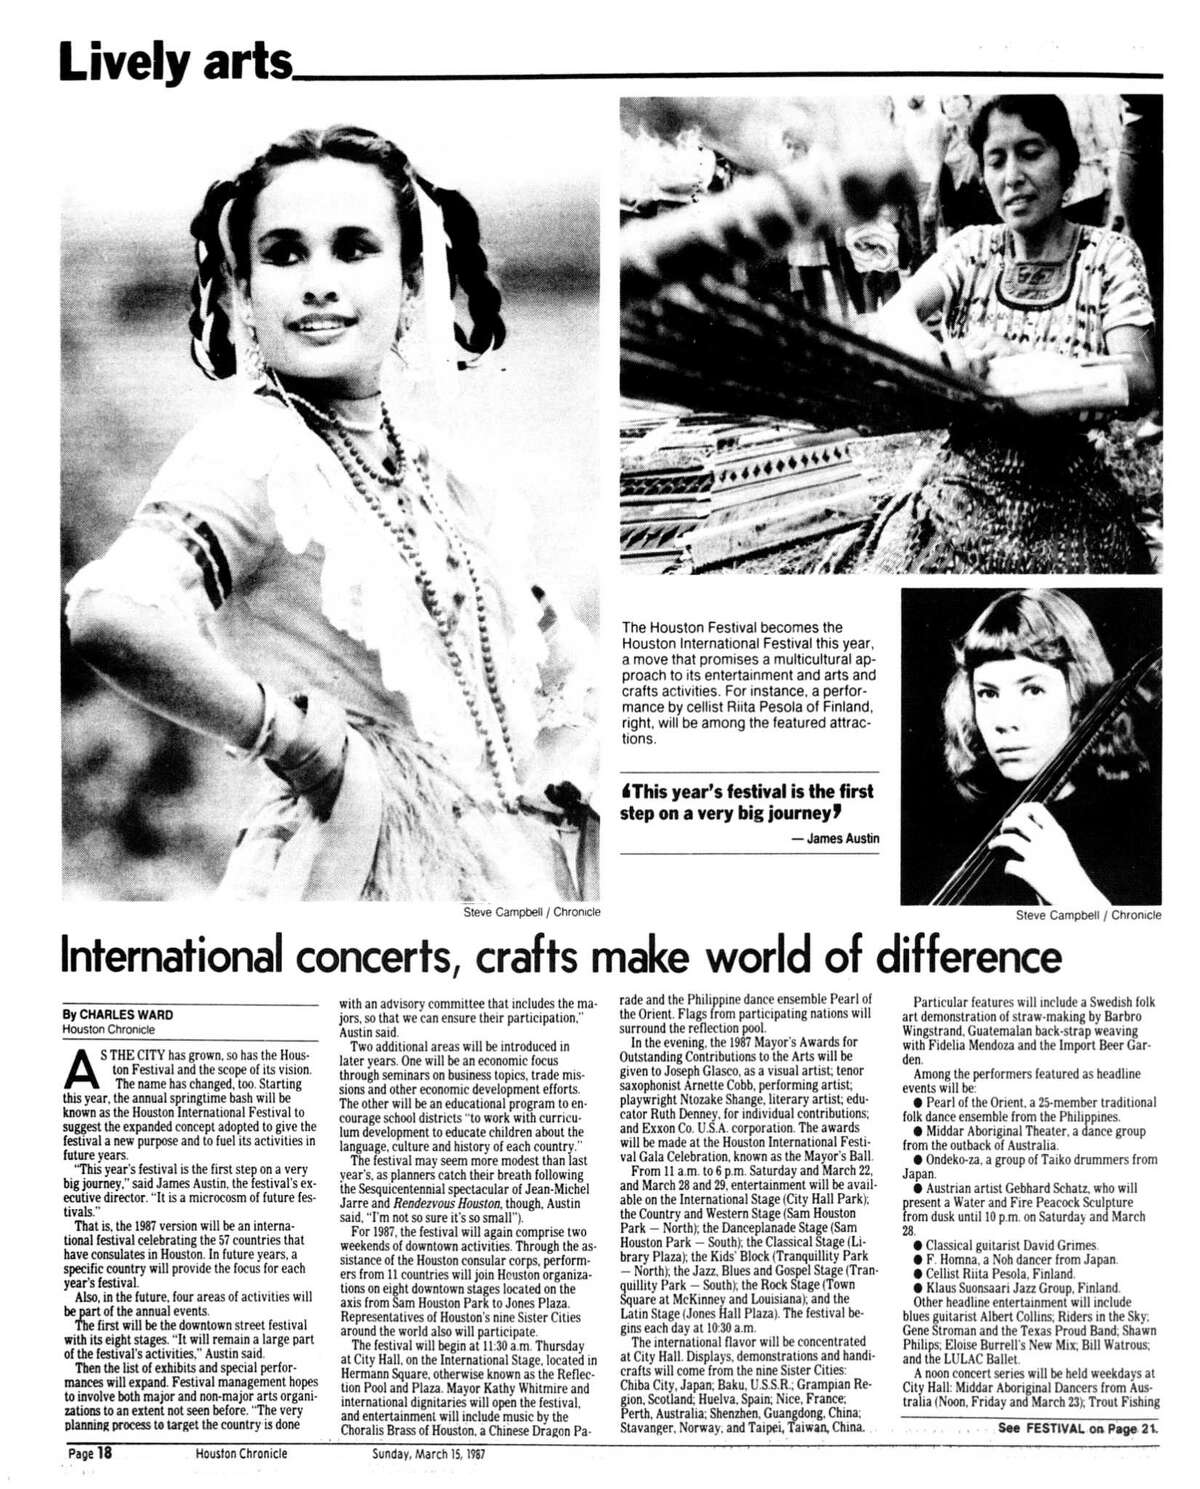 Houston Chronicle inside page - March 15, 1987 - section Zest, page 18. International concerts, crafts make world of difference